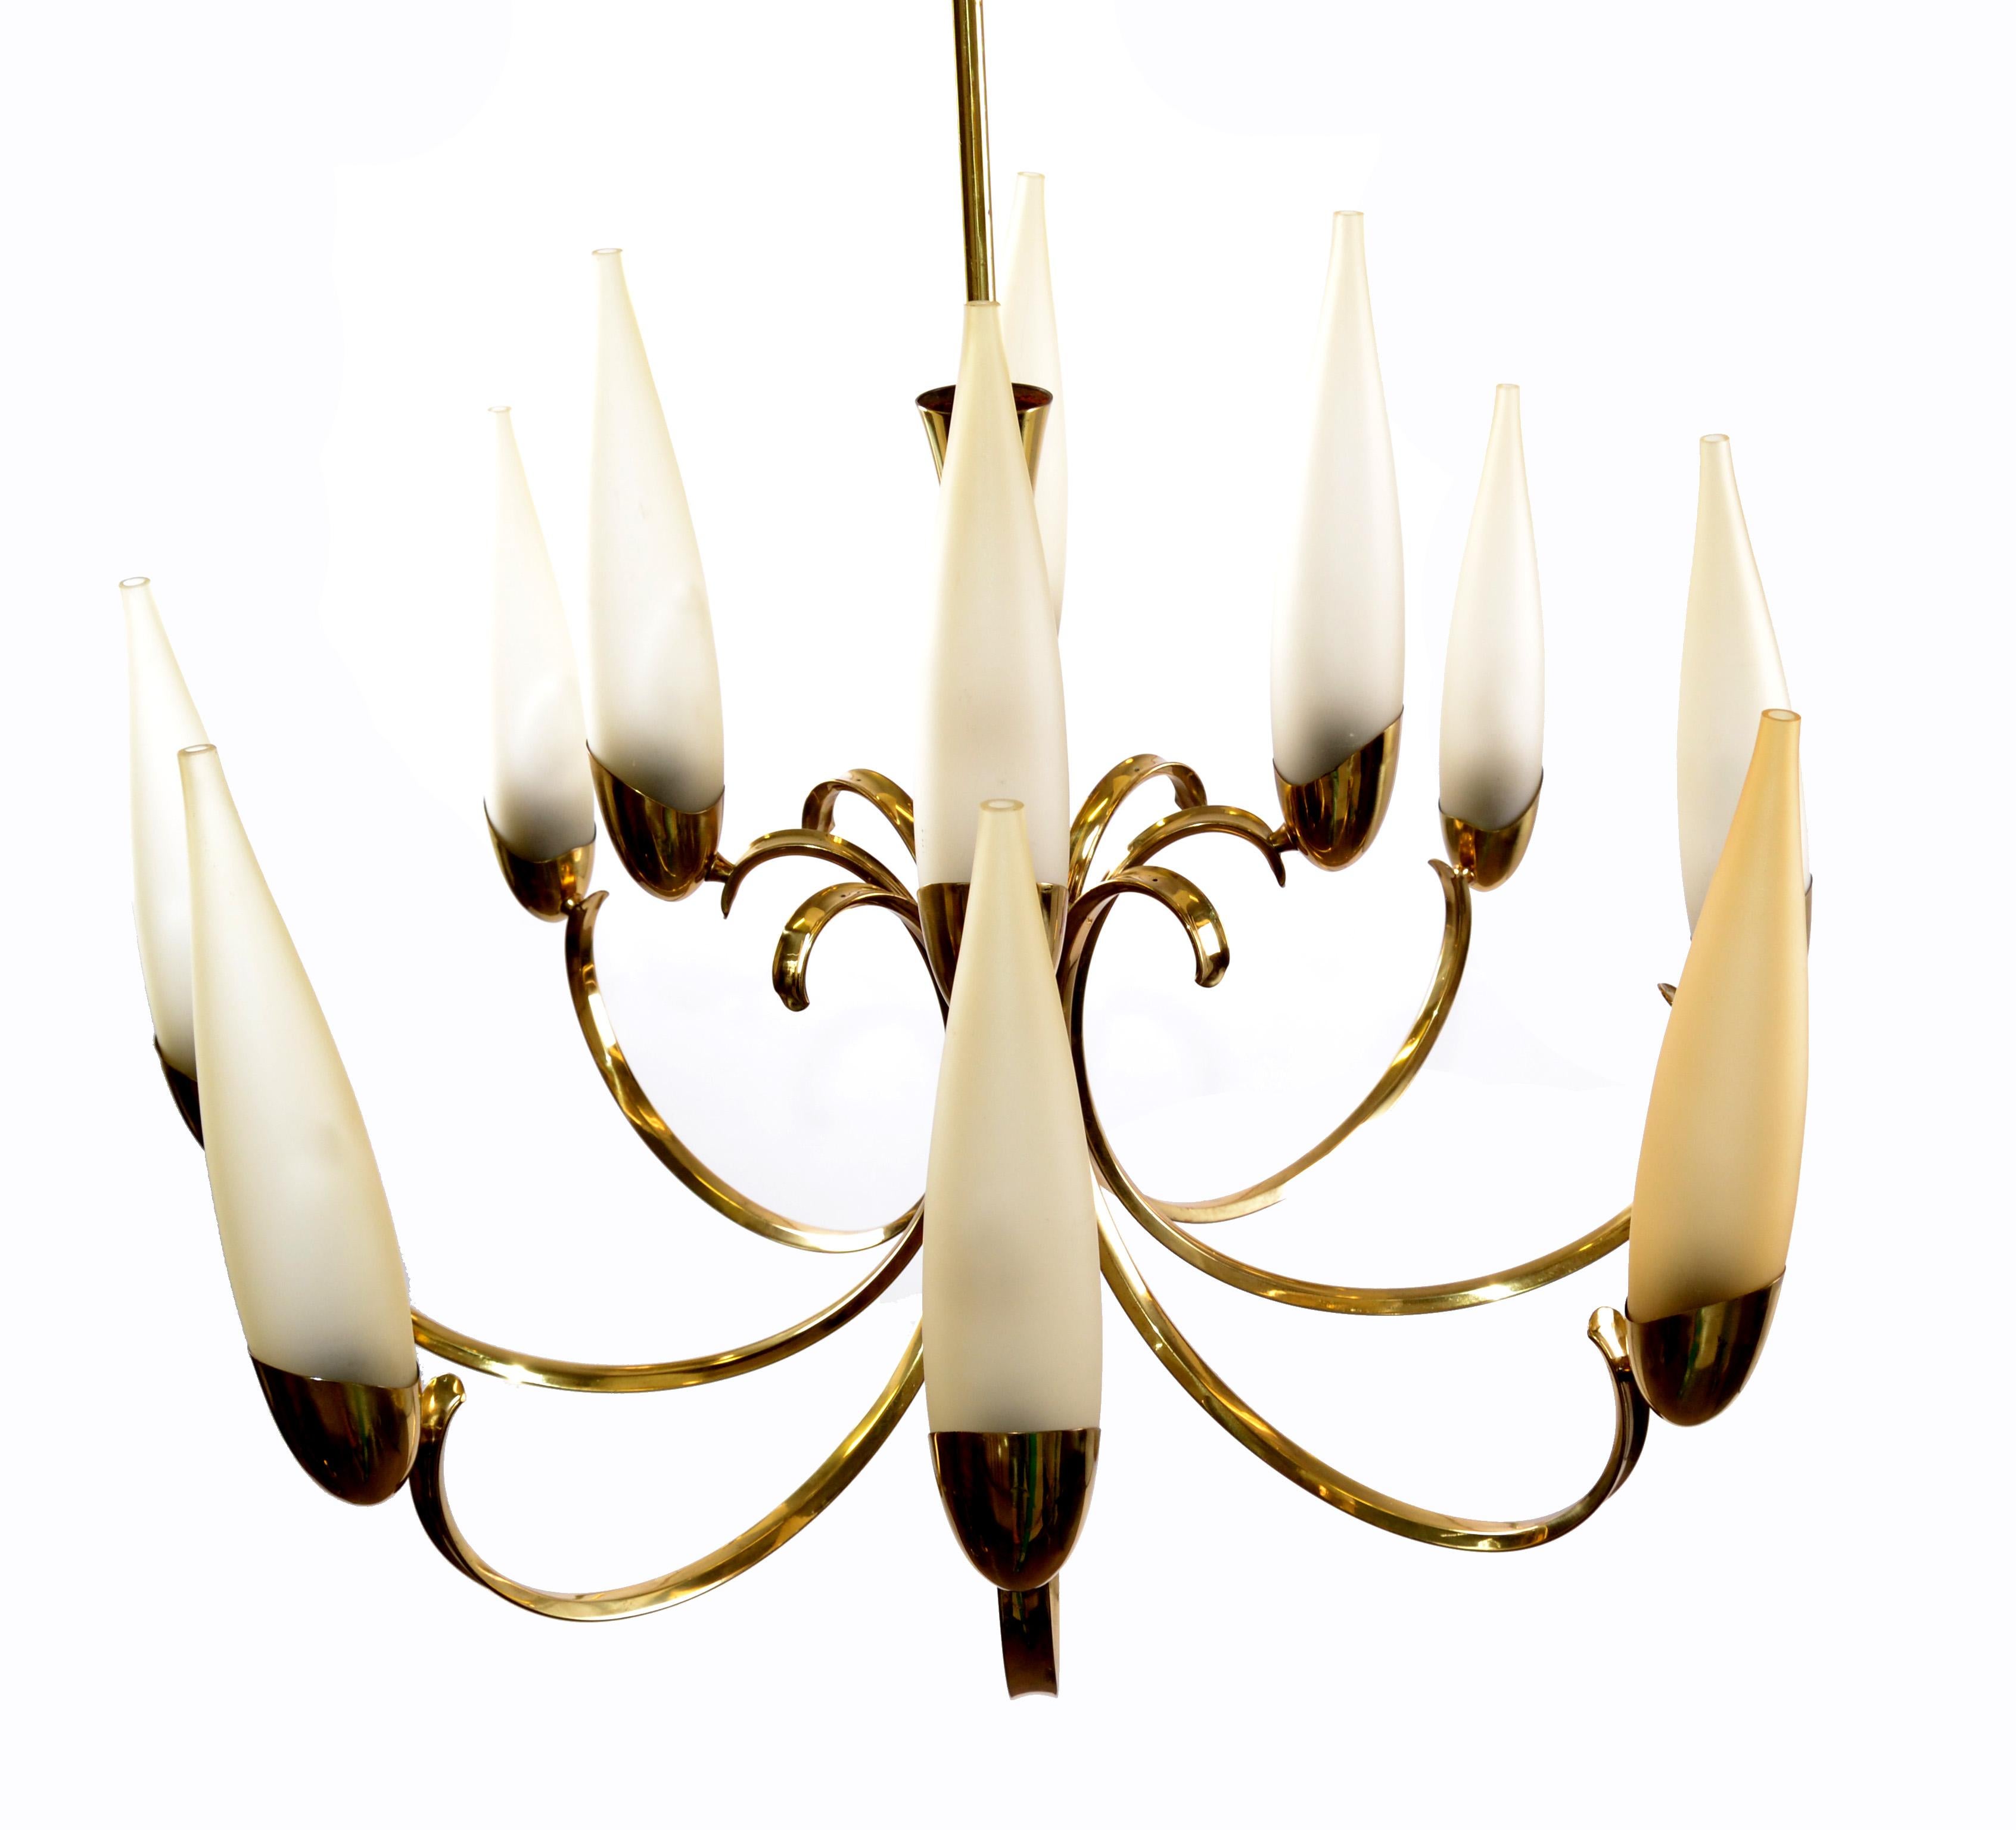 Stilnovo style superb Mid-Century Modern 12-light brass chandelier and blown glass shades, made in Italy.
US rewired and in working condition.
Totally restored and refinished.